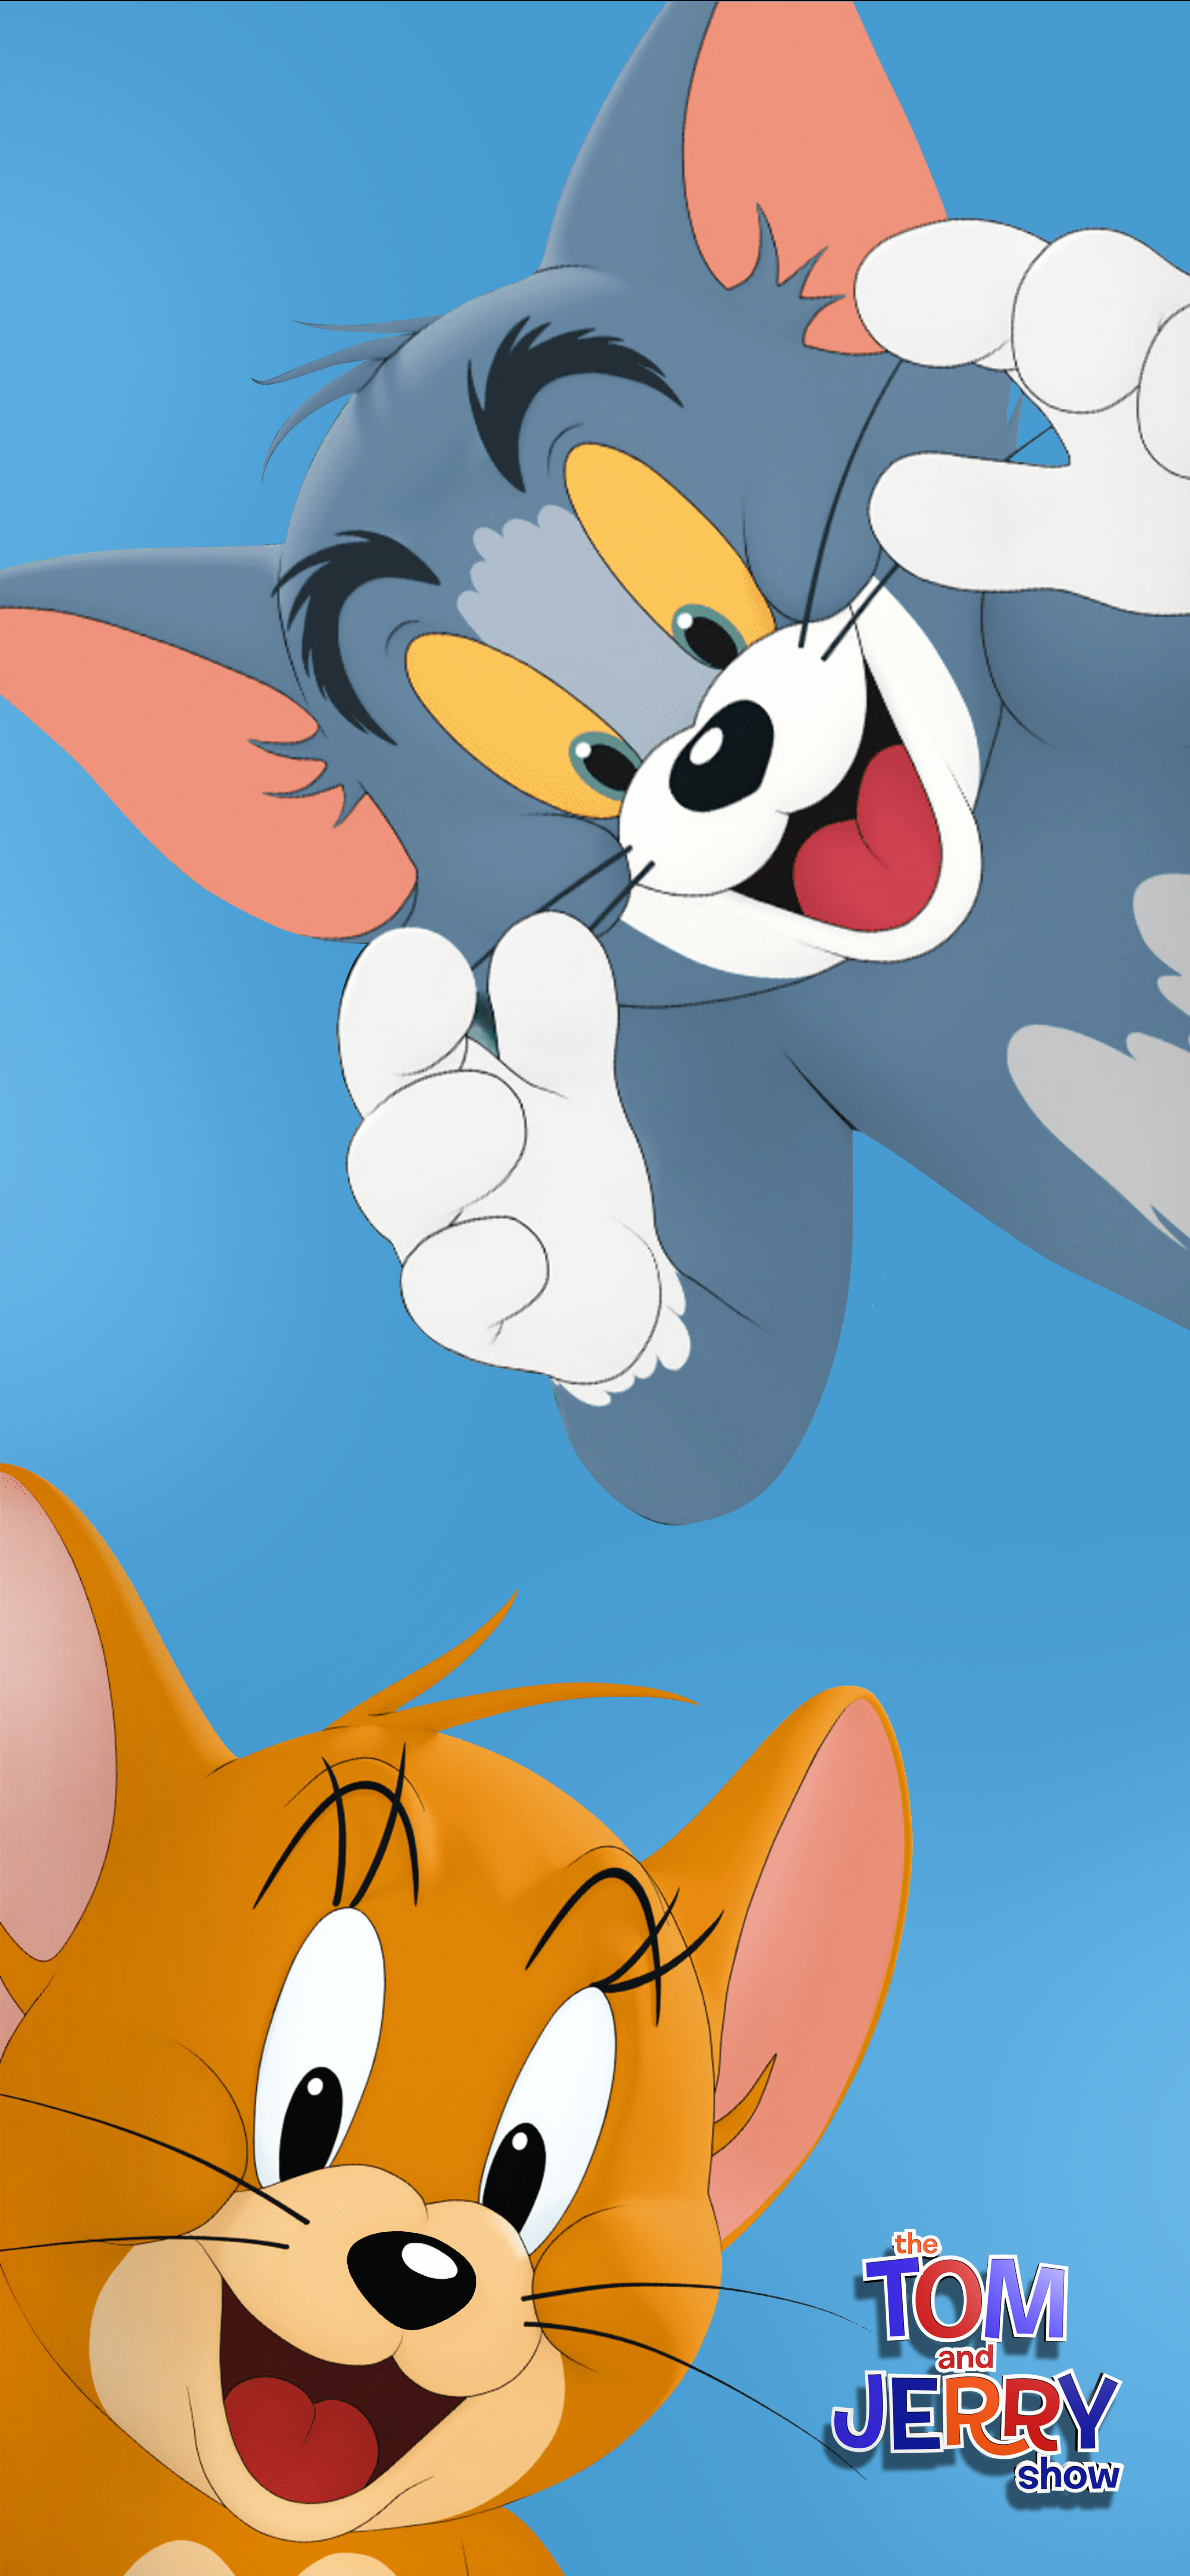 The Tom and Jerry Show | Games, Videos and Downloads | Cartoon Network